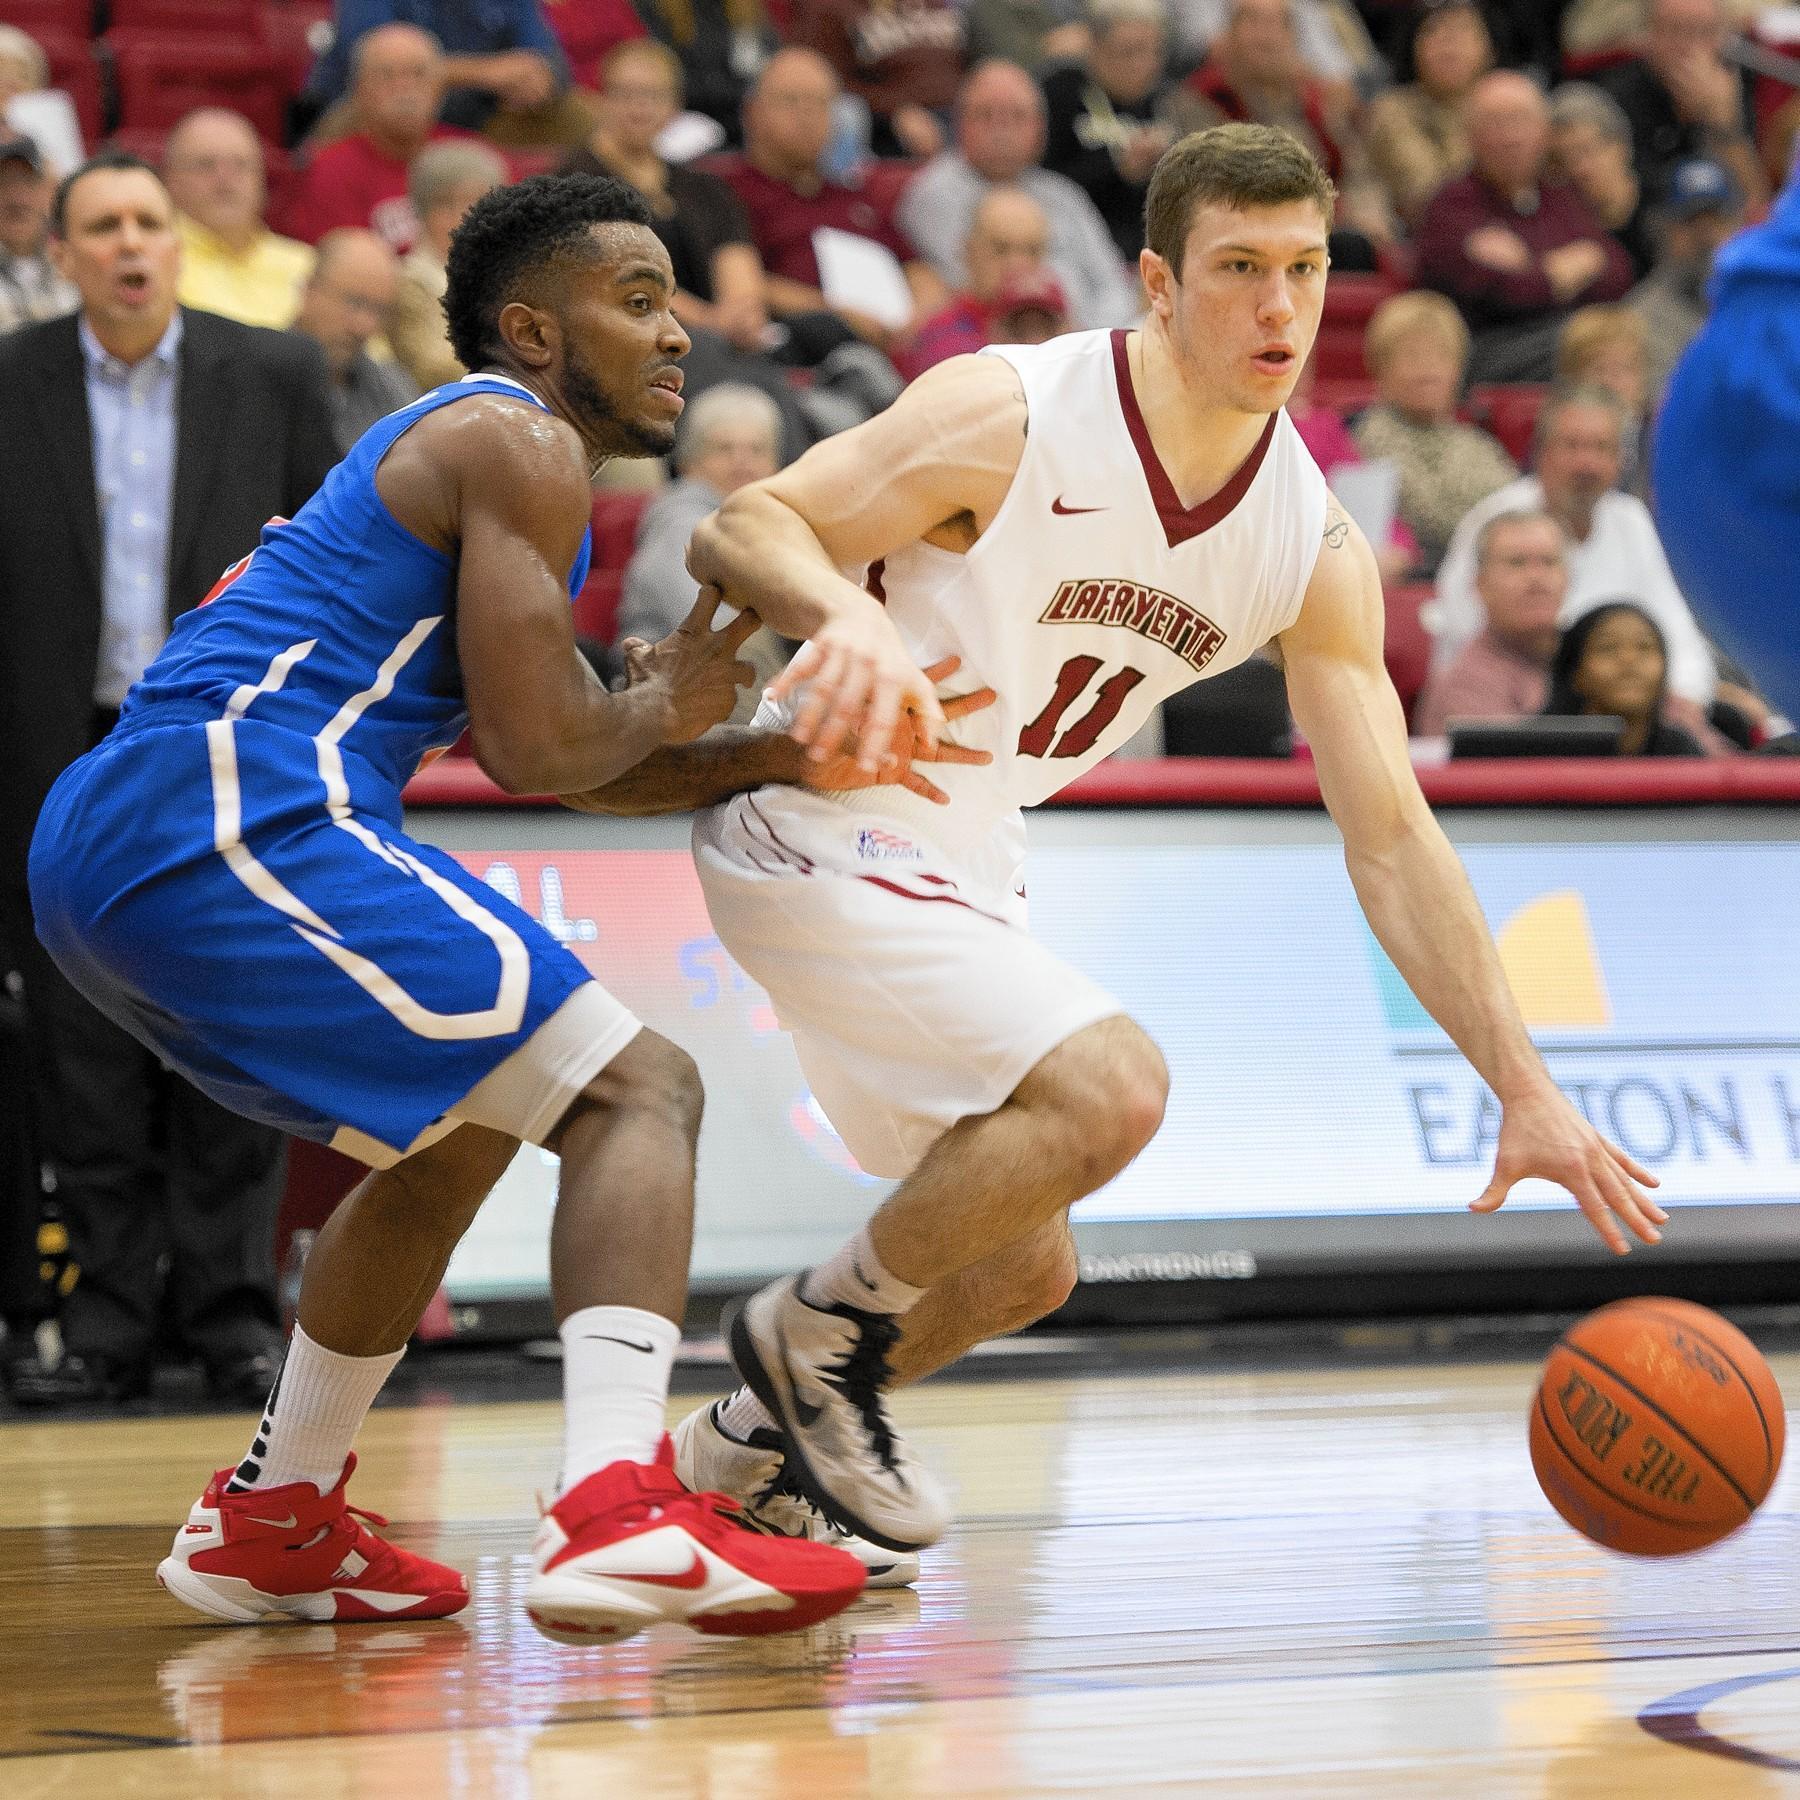 Lafayette men's basketball team seeks return to contention - The Morning Call1800 x 1800